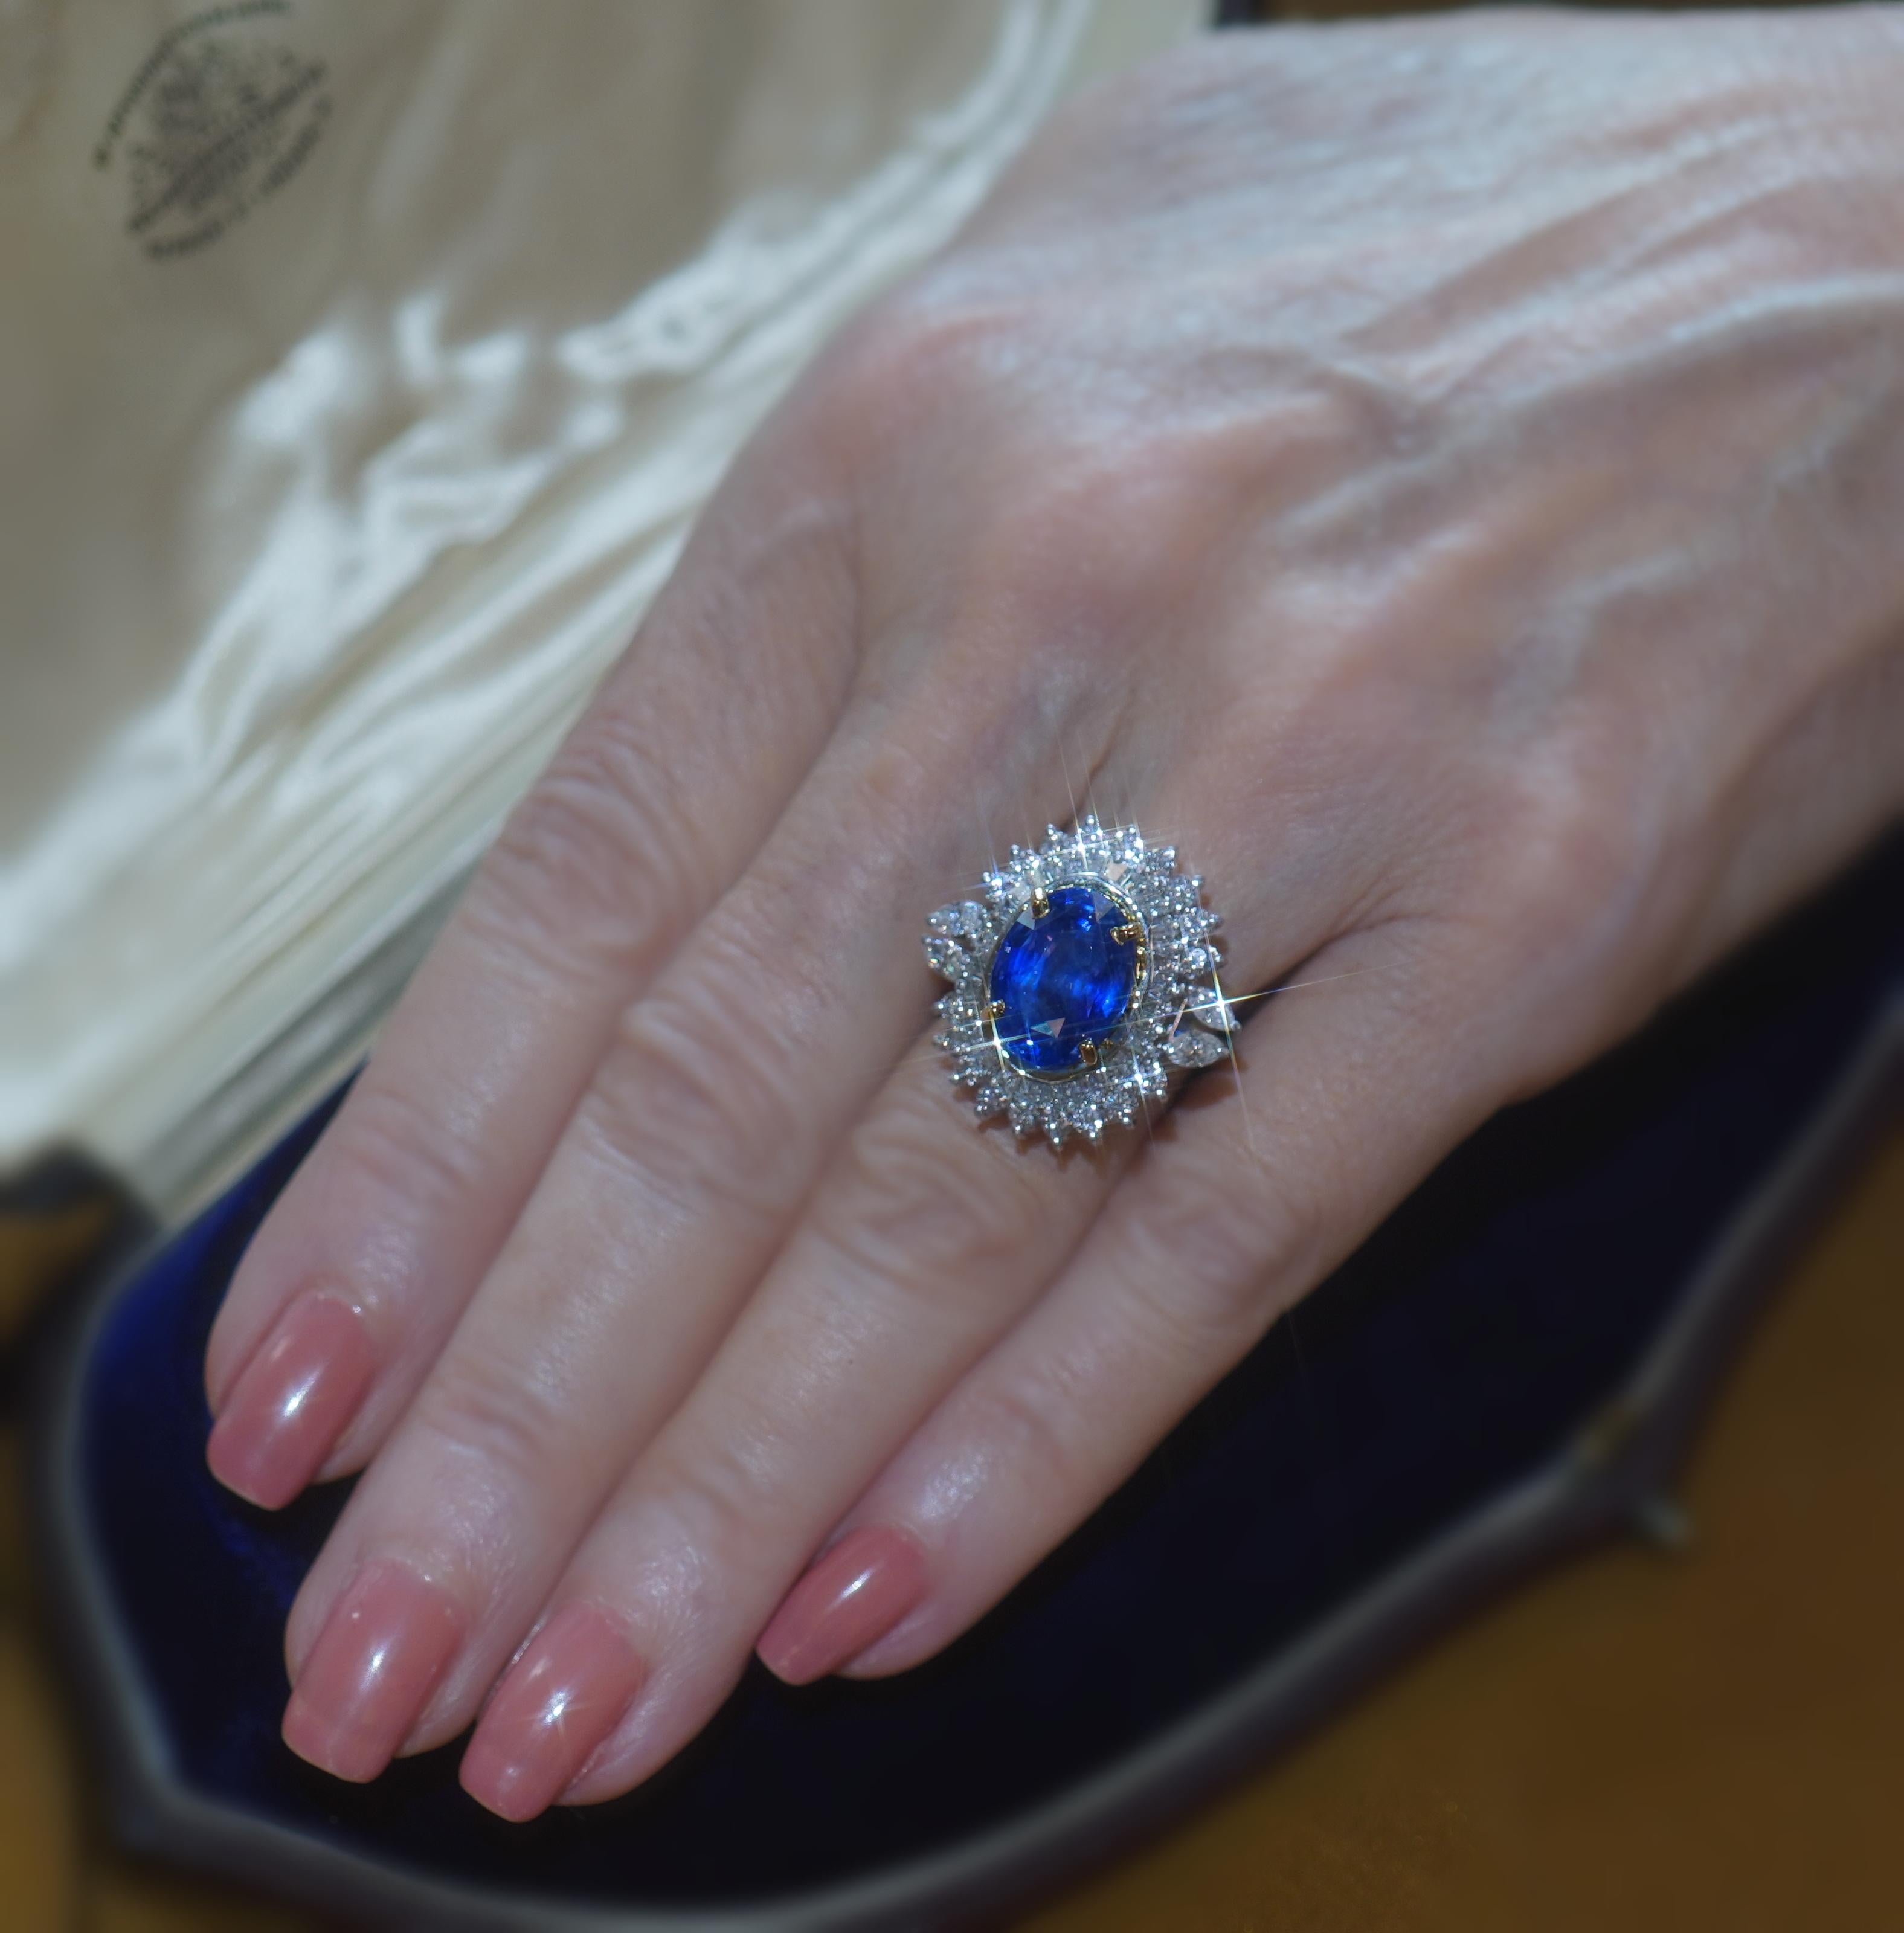 Old South Jewels proudly presents...VINTAGE LUXURY.   GIA CERTIFIED HUGE 11.38 CARAT UNHEATED SAPPHIRE DIAMOND ANTIQUE 14K RING & BOX!   BIG 8.35 CARAT BRILLIANT ROYAL BLUE GIA CERTIFIED RARE NO HEAT NATURAL SAPPHIRE.   This Gorgeous Sapphire Is